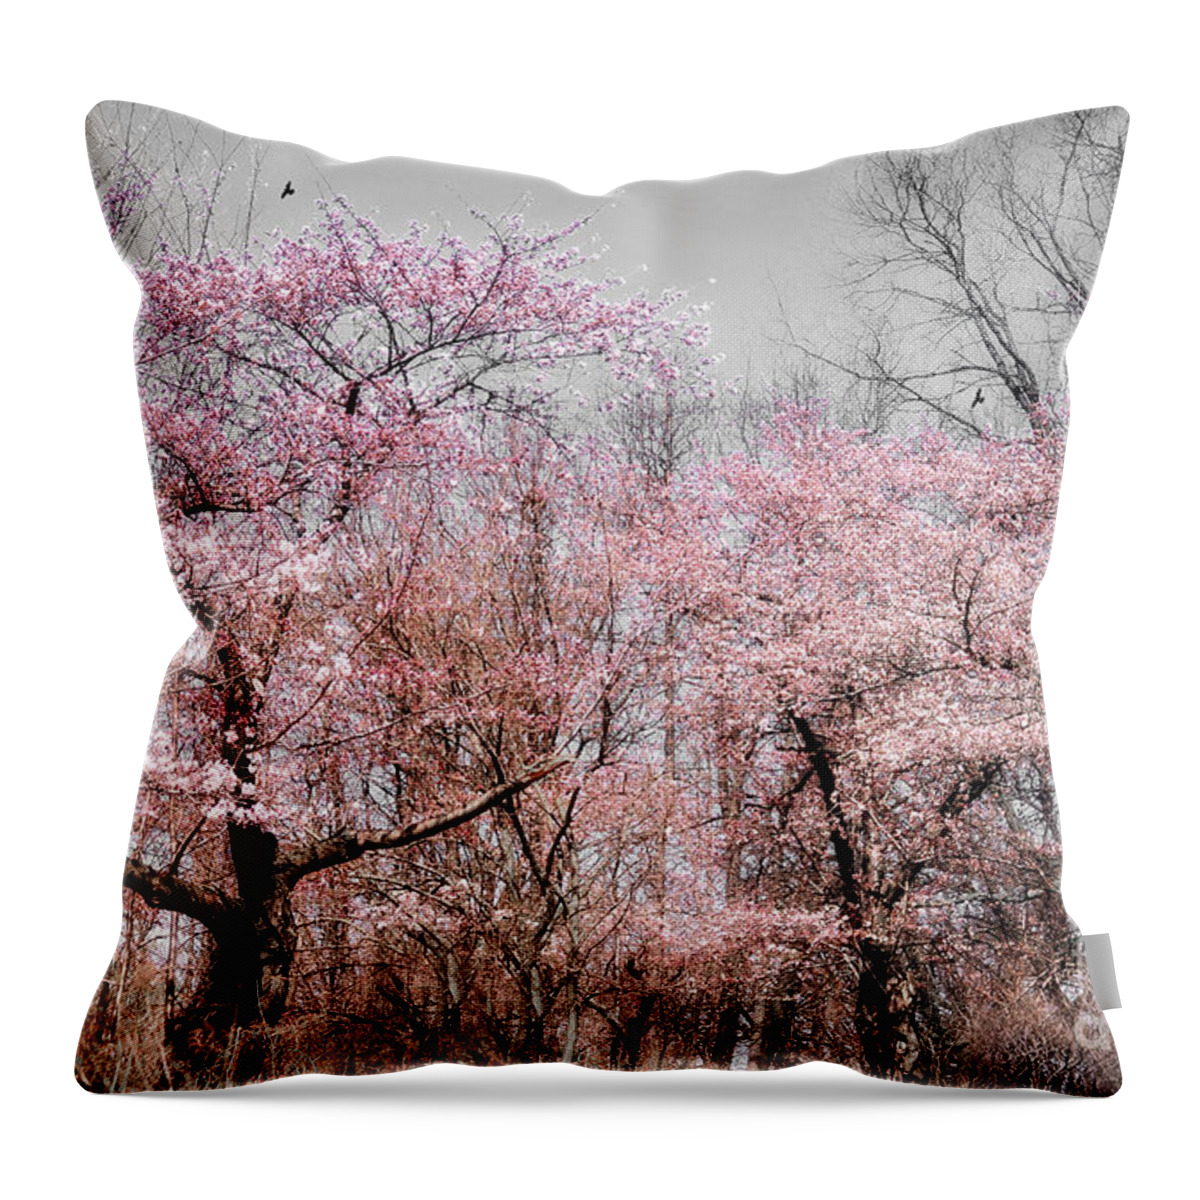 Spring Throw Pillow featuring the photograph Cherry Blossom Trees by Elaine Manley